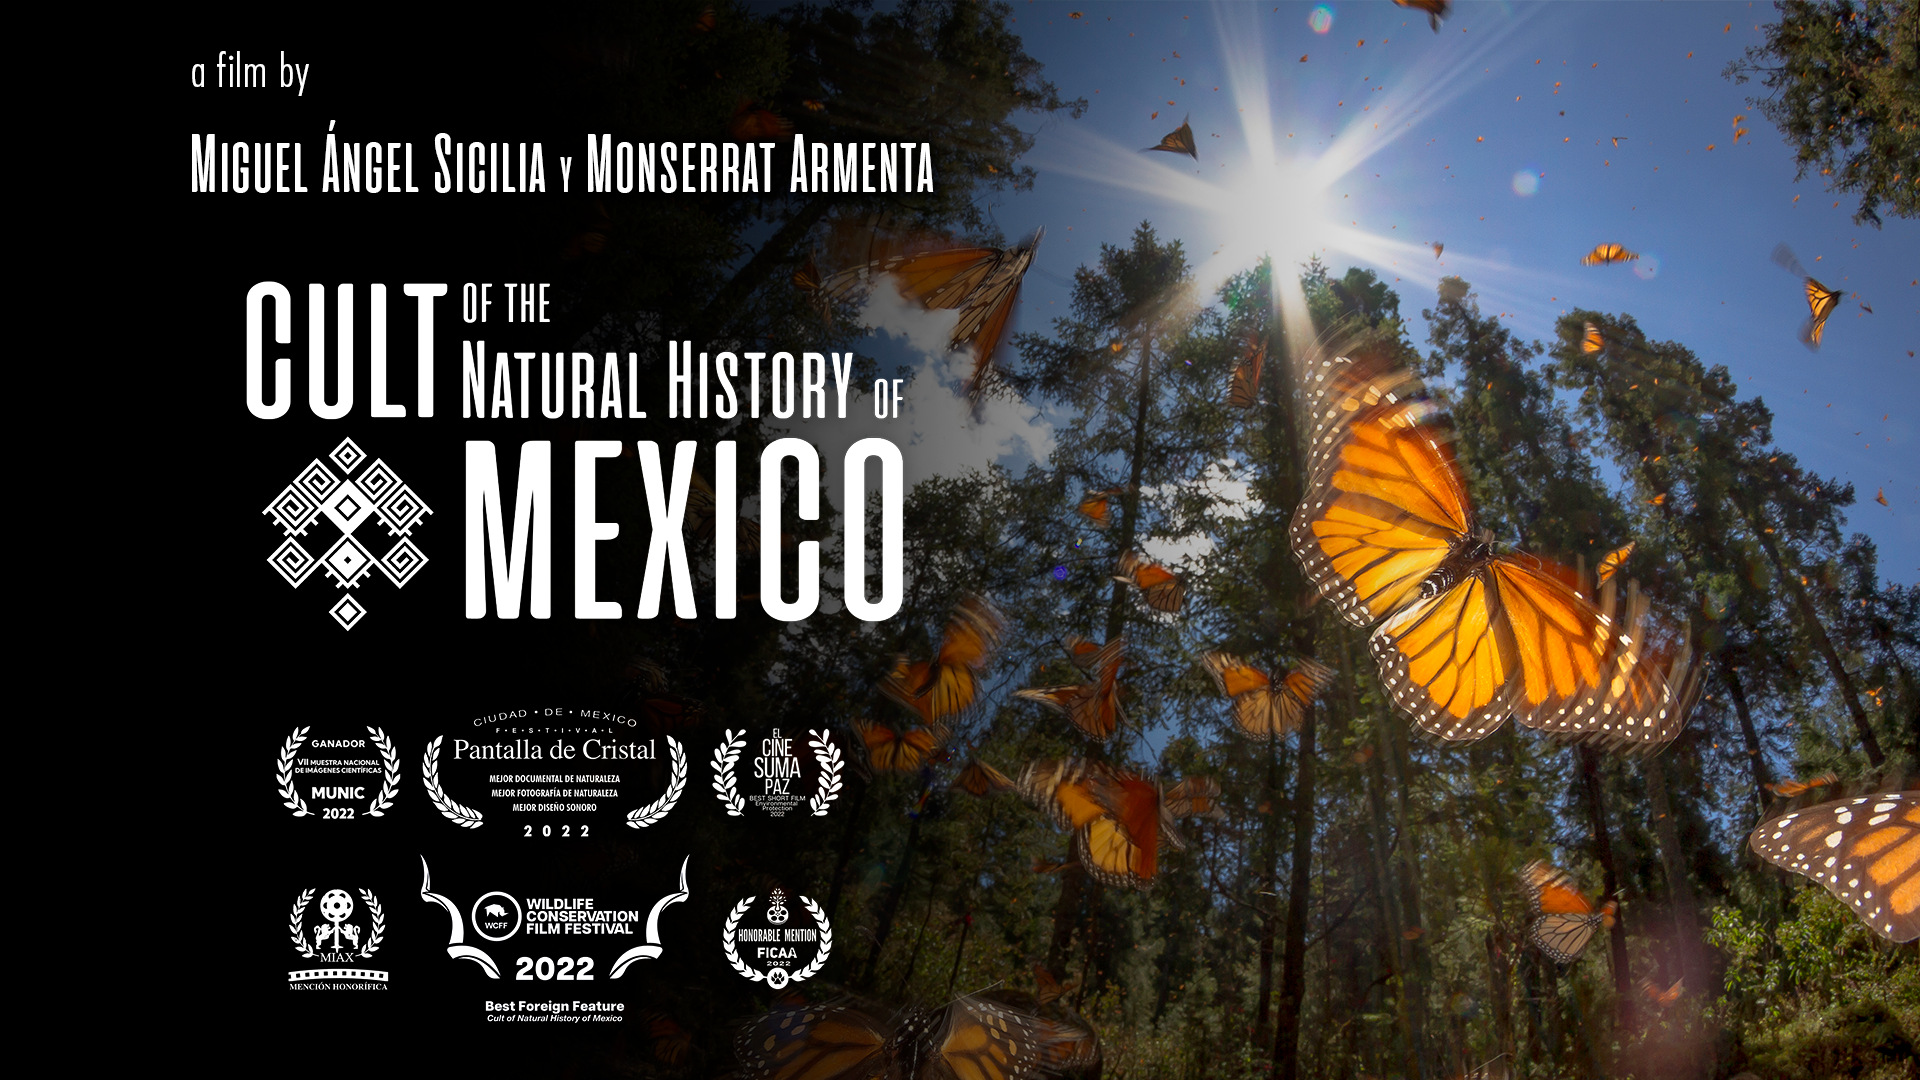 Cult of the Natural History of Mexico